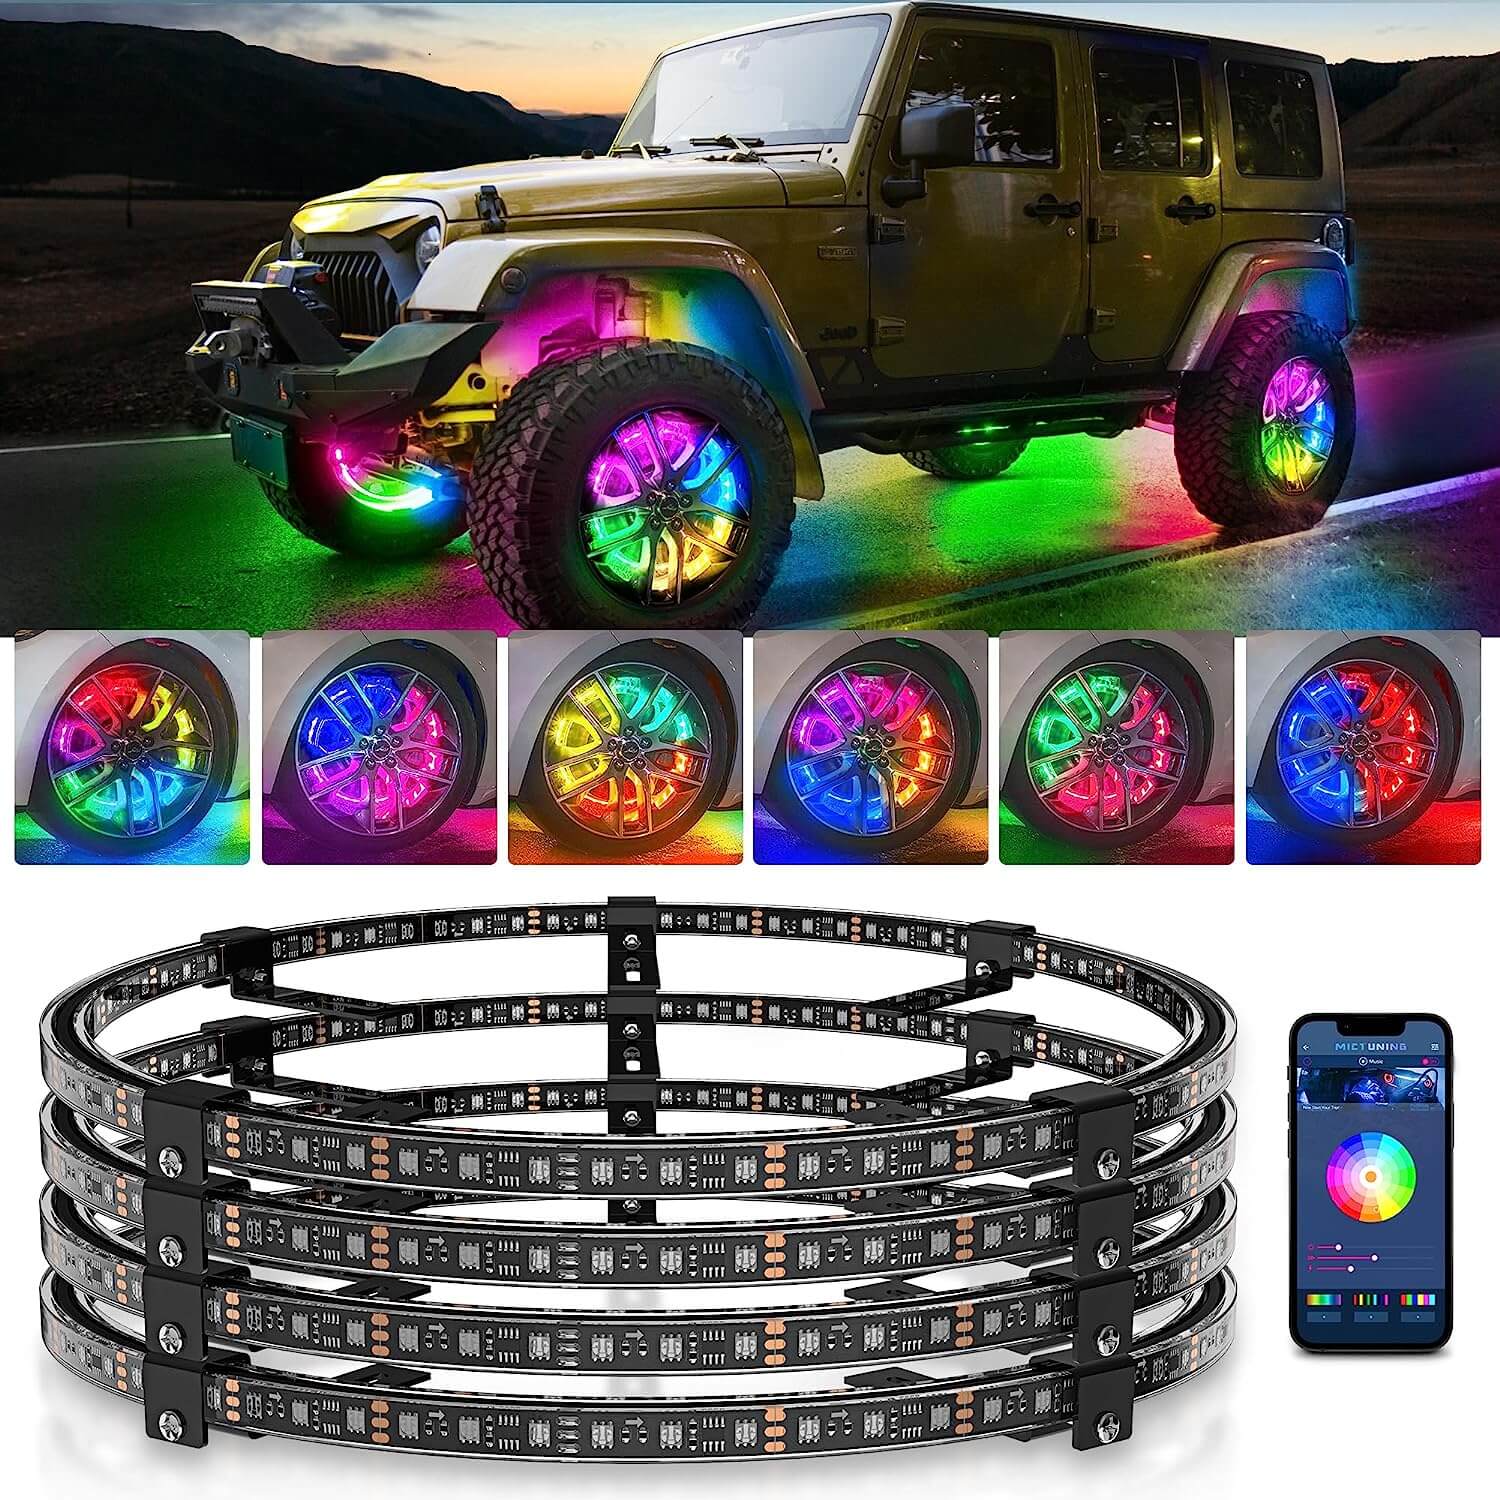 15.5″/17″ V1 RGB+IC Chasing Color Wheel Ring Lights Kit with APP Control, Double-Row Neon Wheel Rim Lights